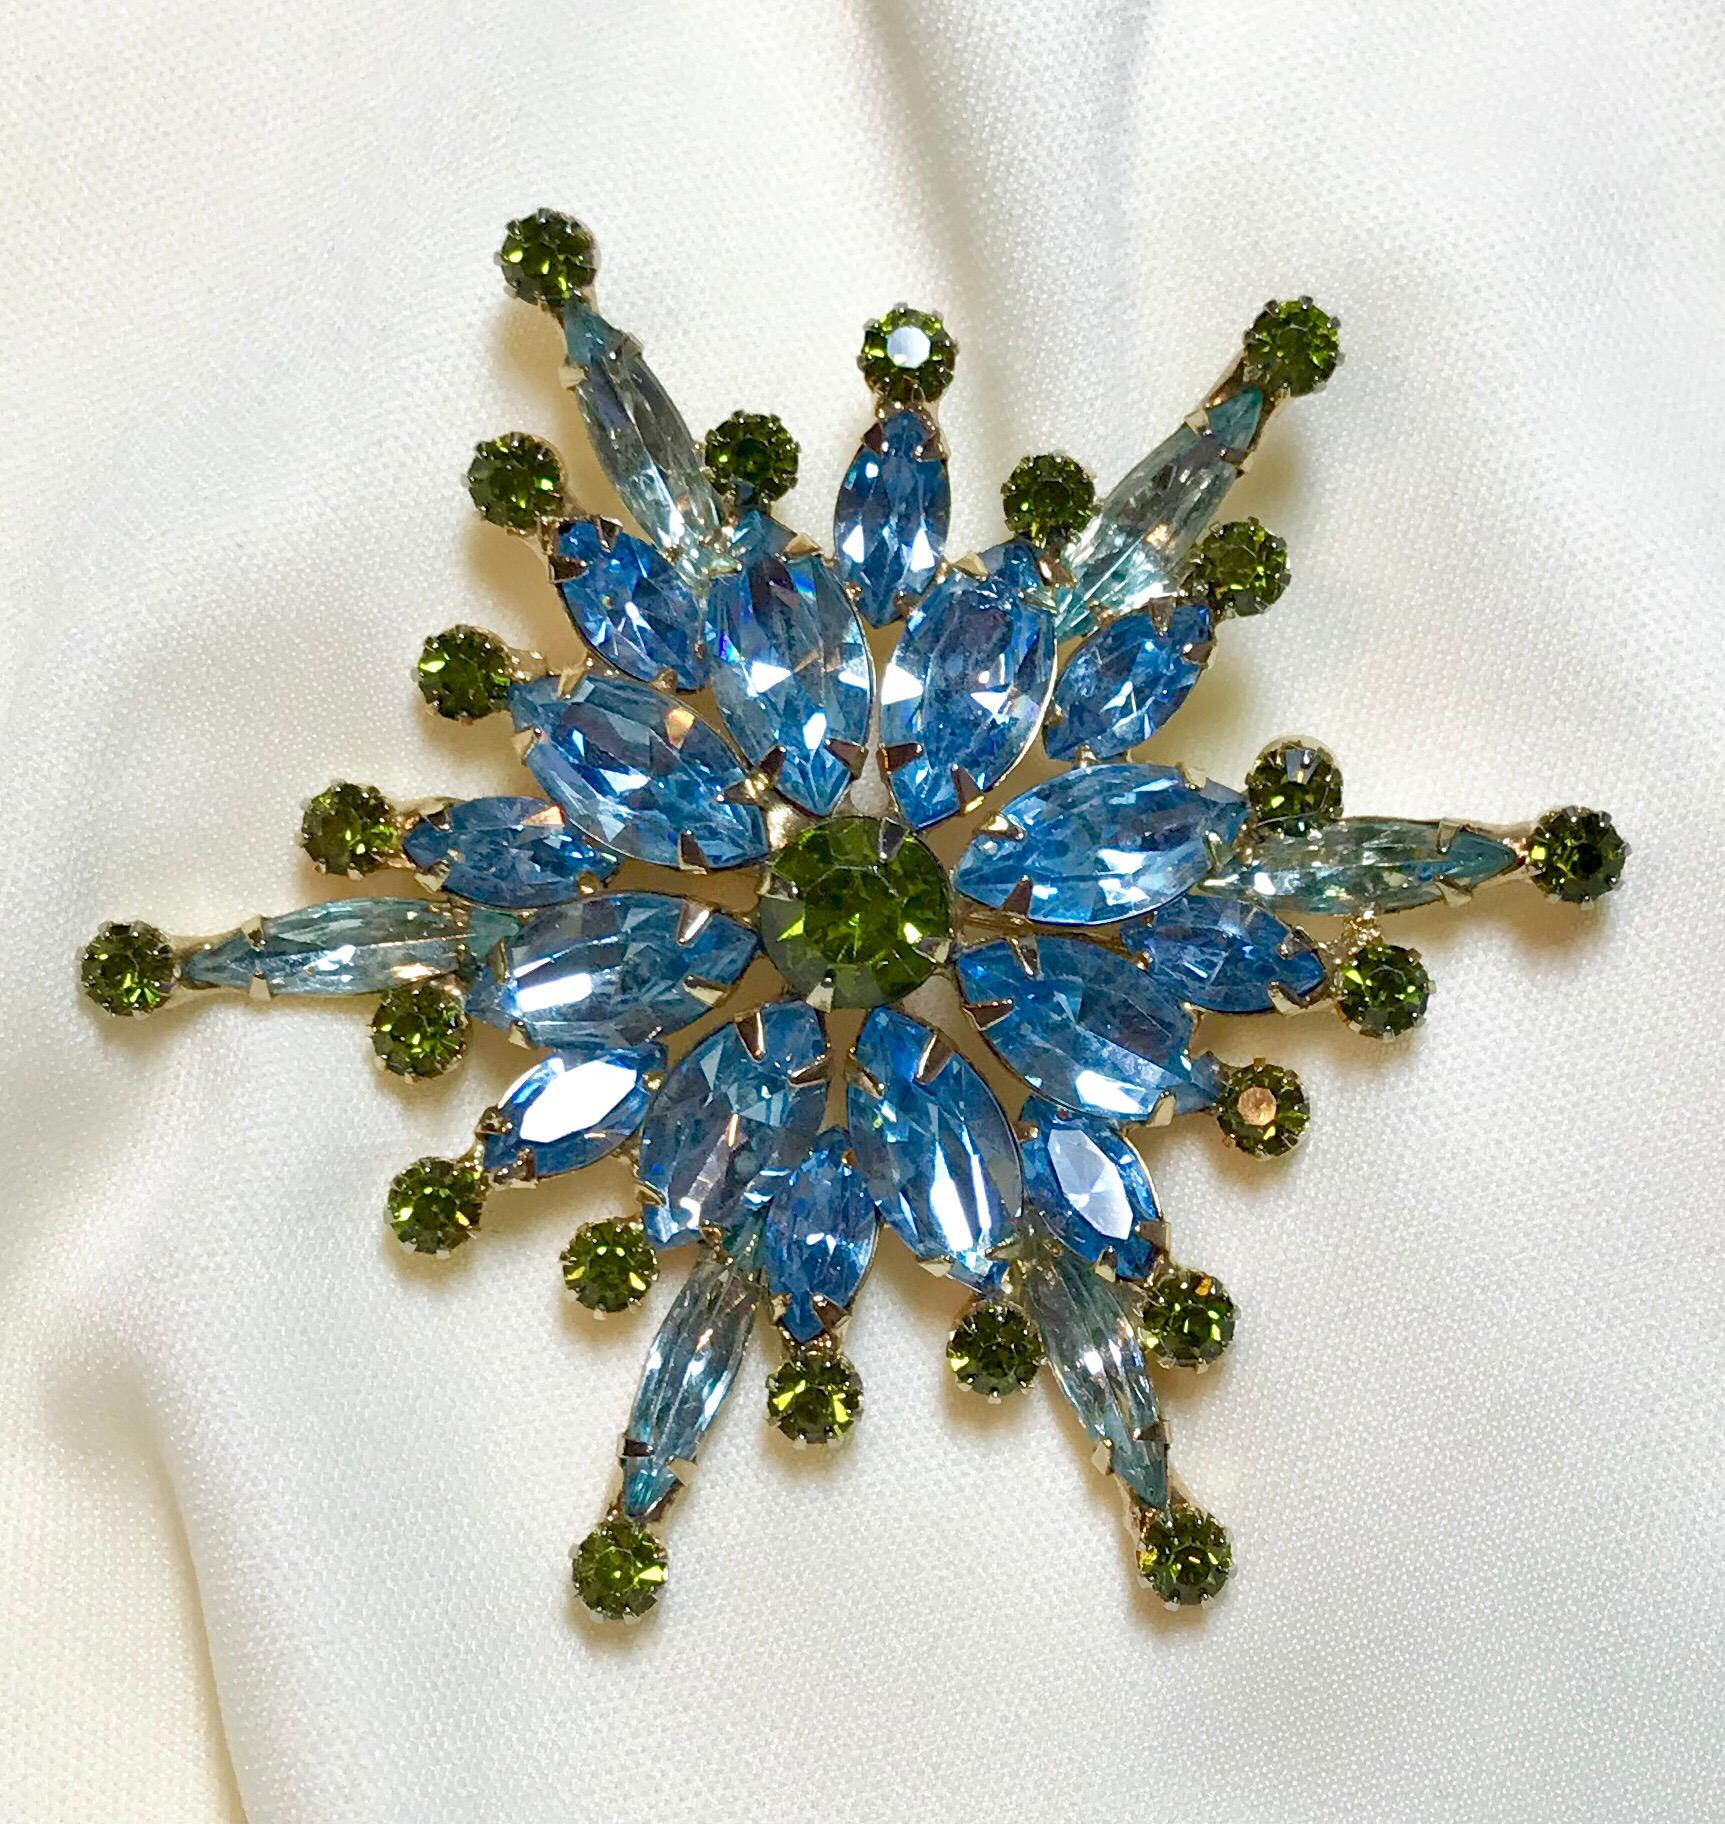 Contemporary Hattie Carnegie Blue and Green Brooch and Earring Set, Circa 1960 For Sale